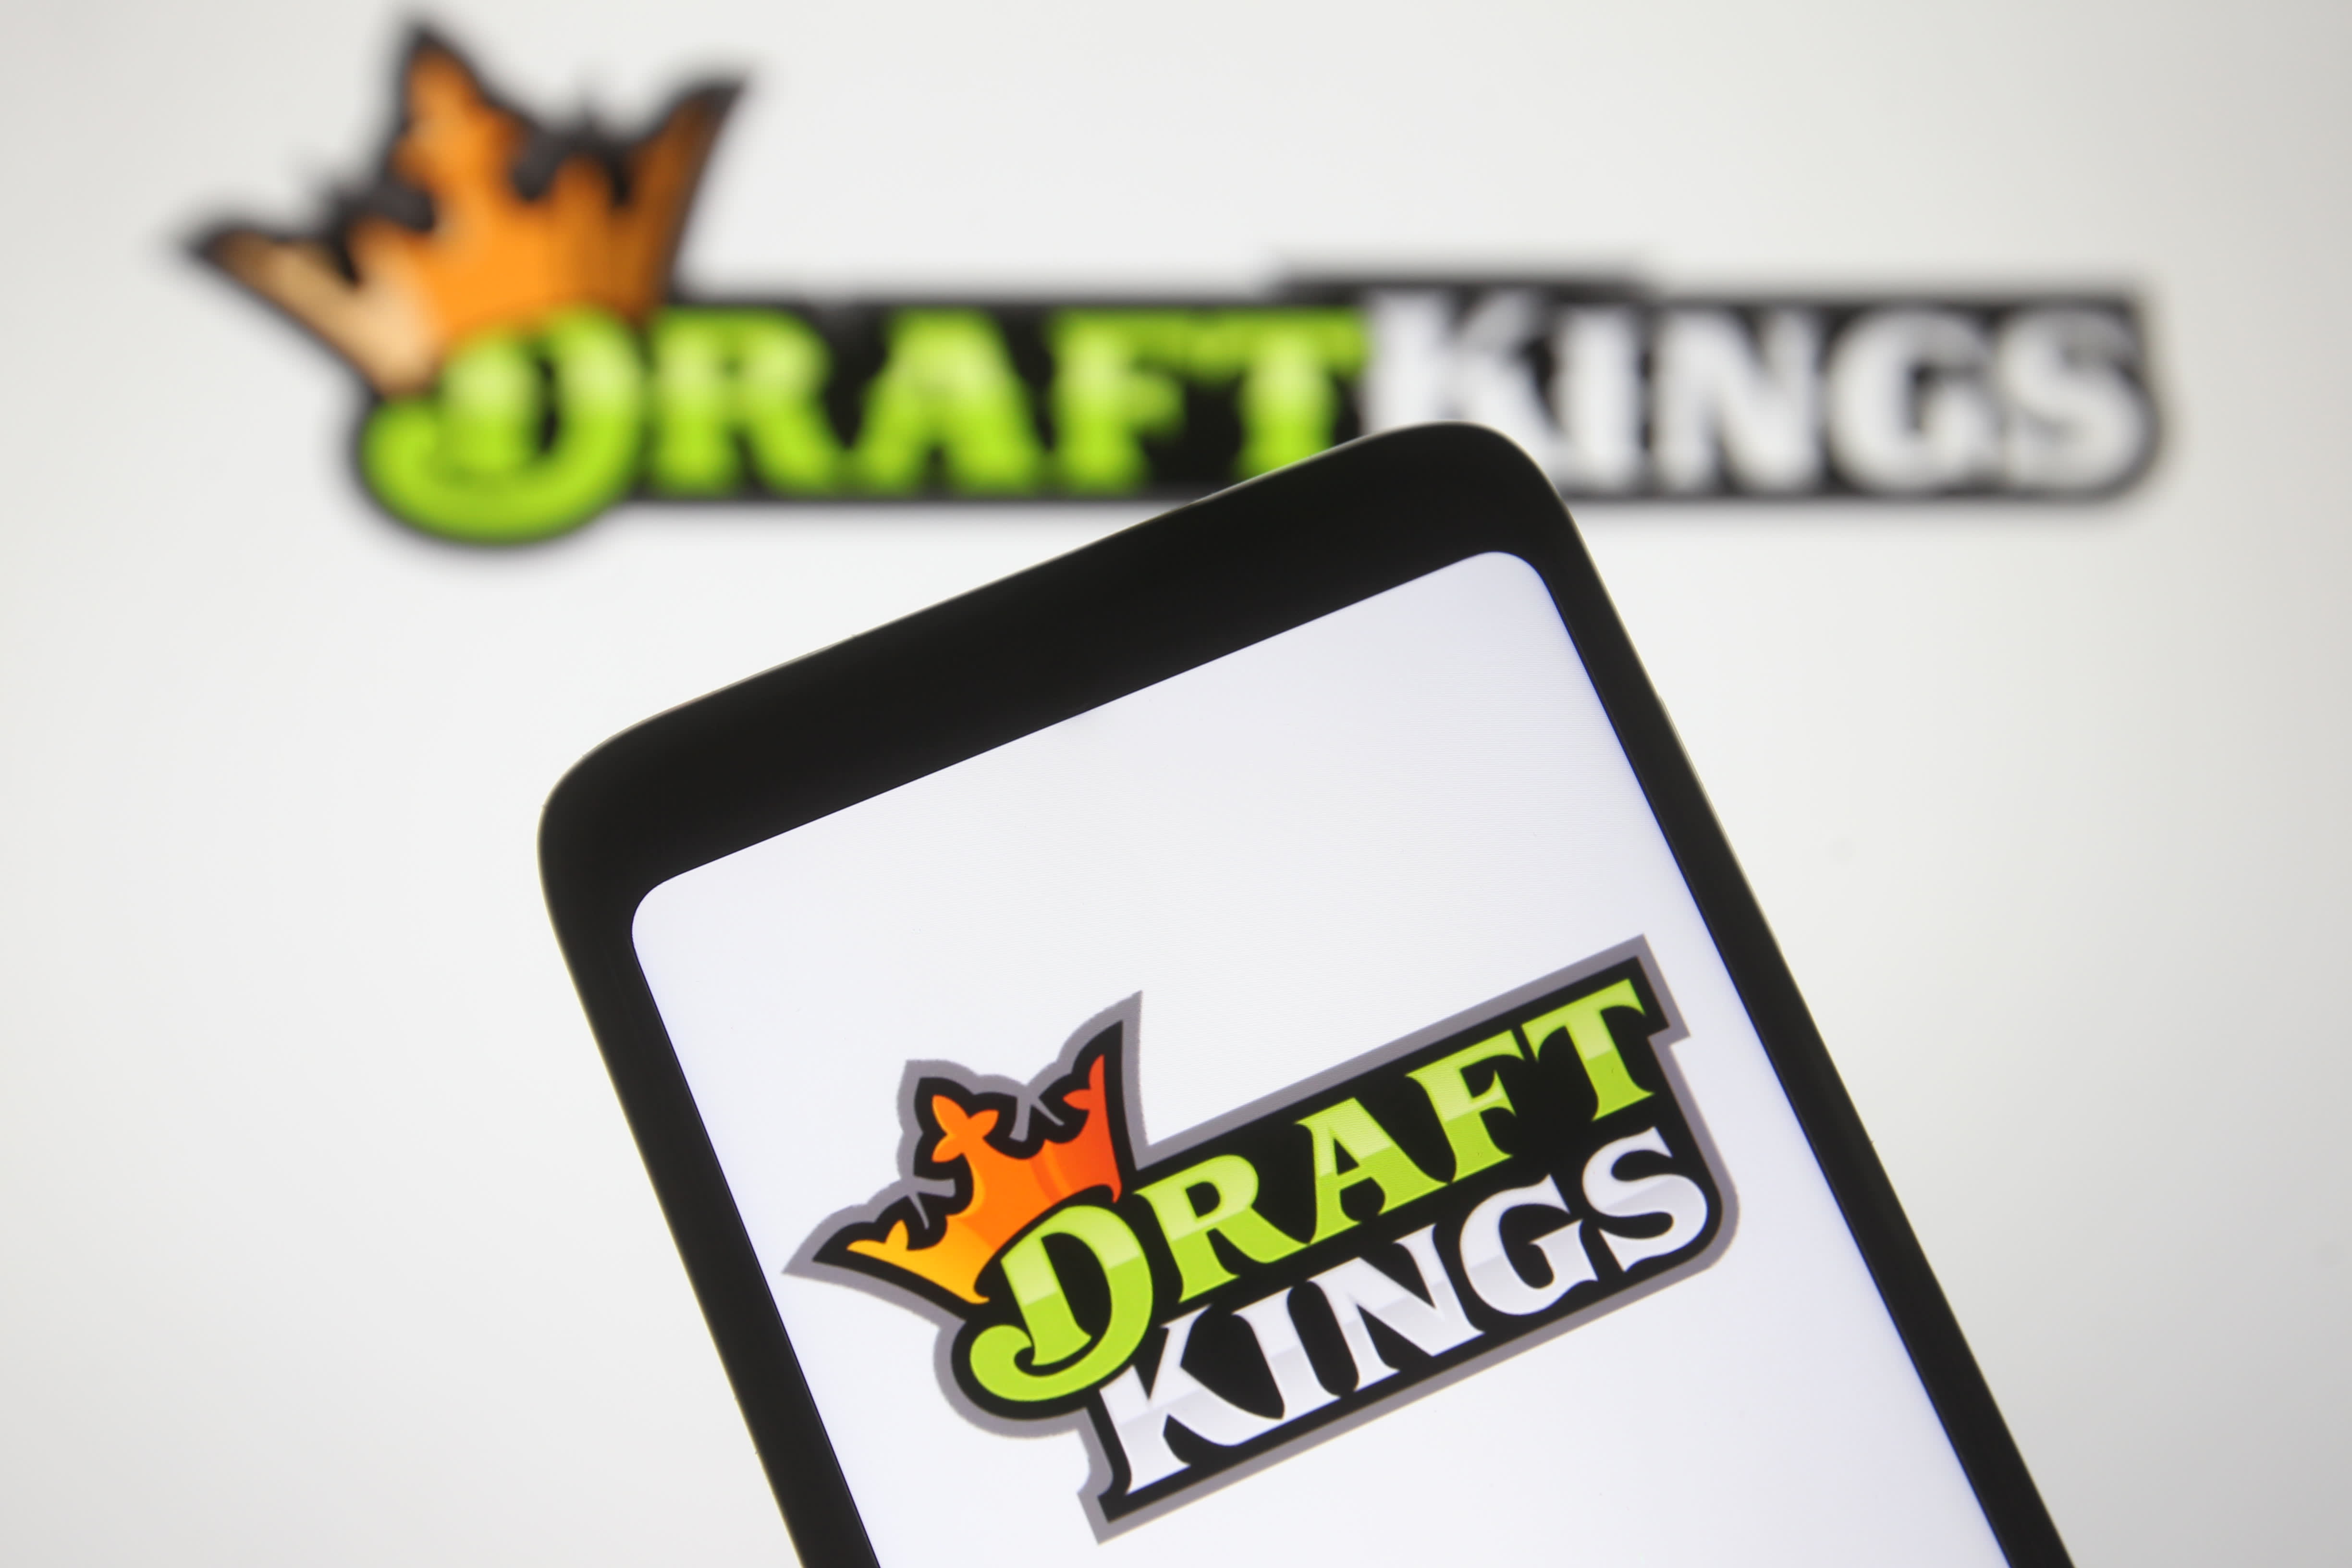 DraftKings stock falls 10% after Hindenburg Research reveals short position